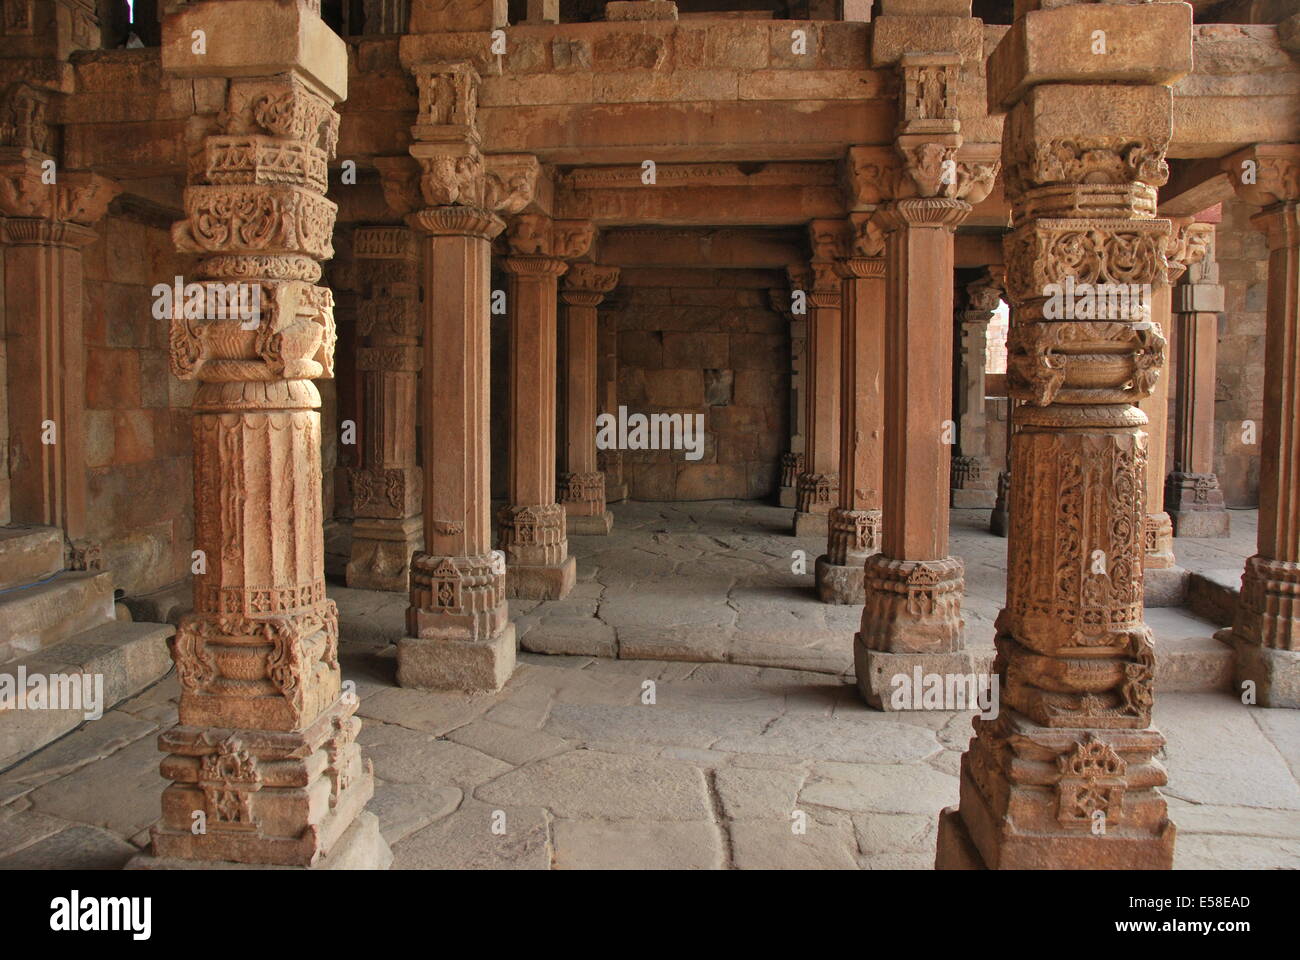 Qutab Minar. Mosque,.Delhi,.India.  The mosque with Hindu ornamentation stolen from Hindu temples. Sandstone carvings. Stock Photo